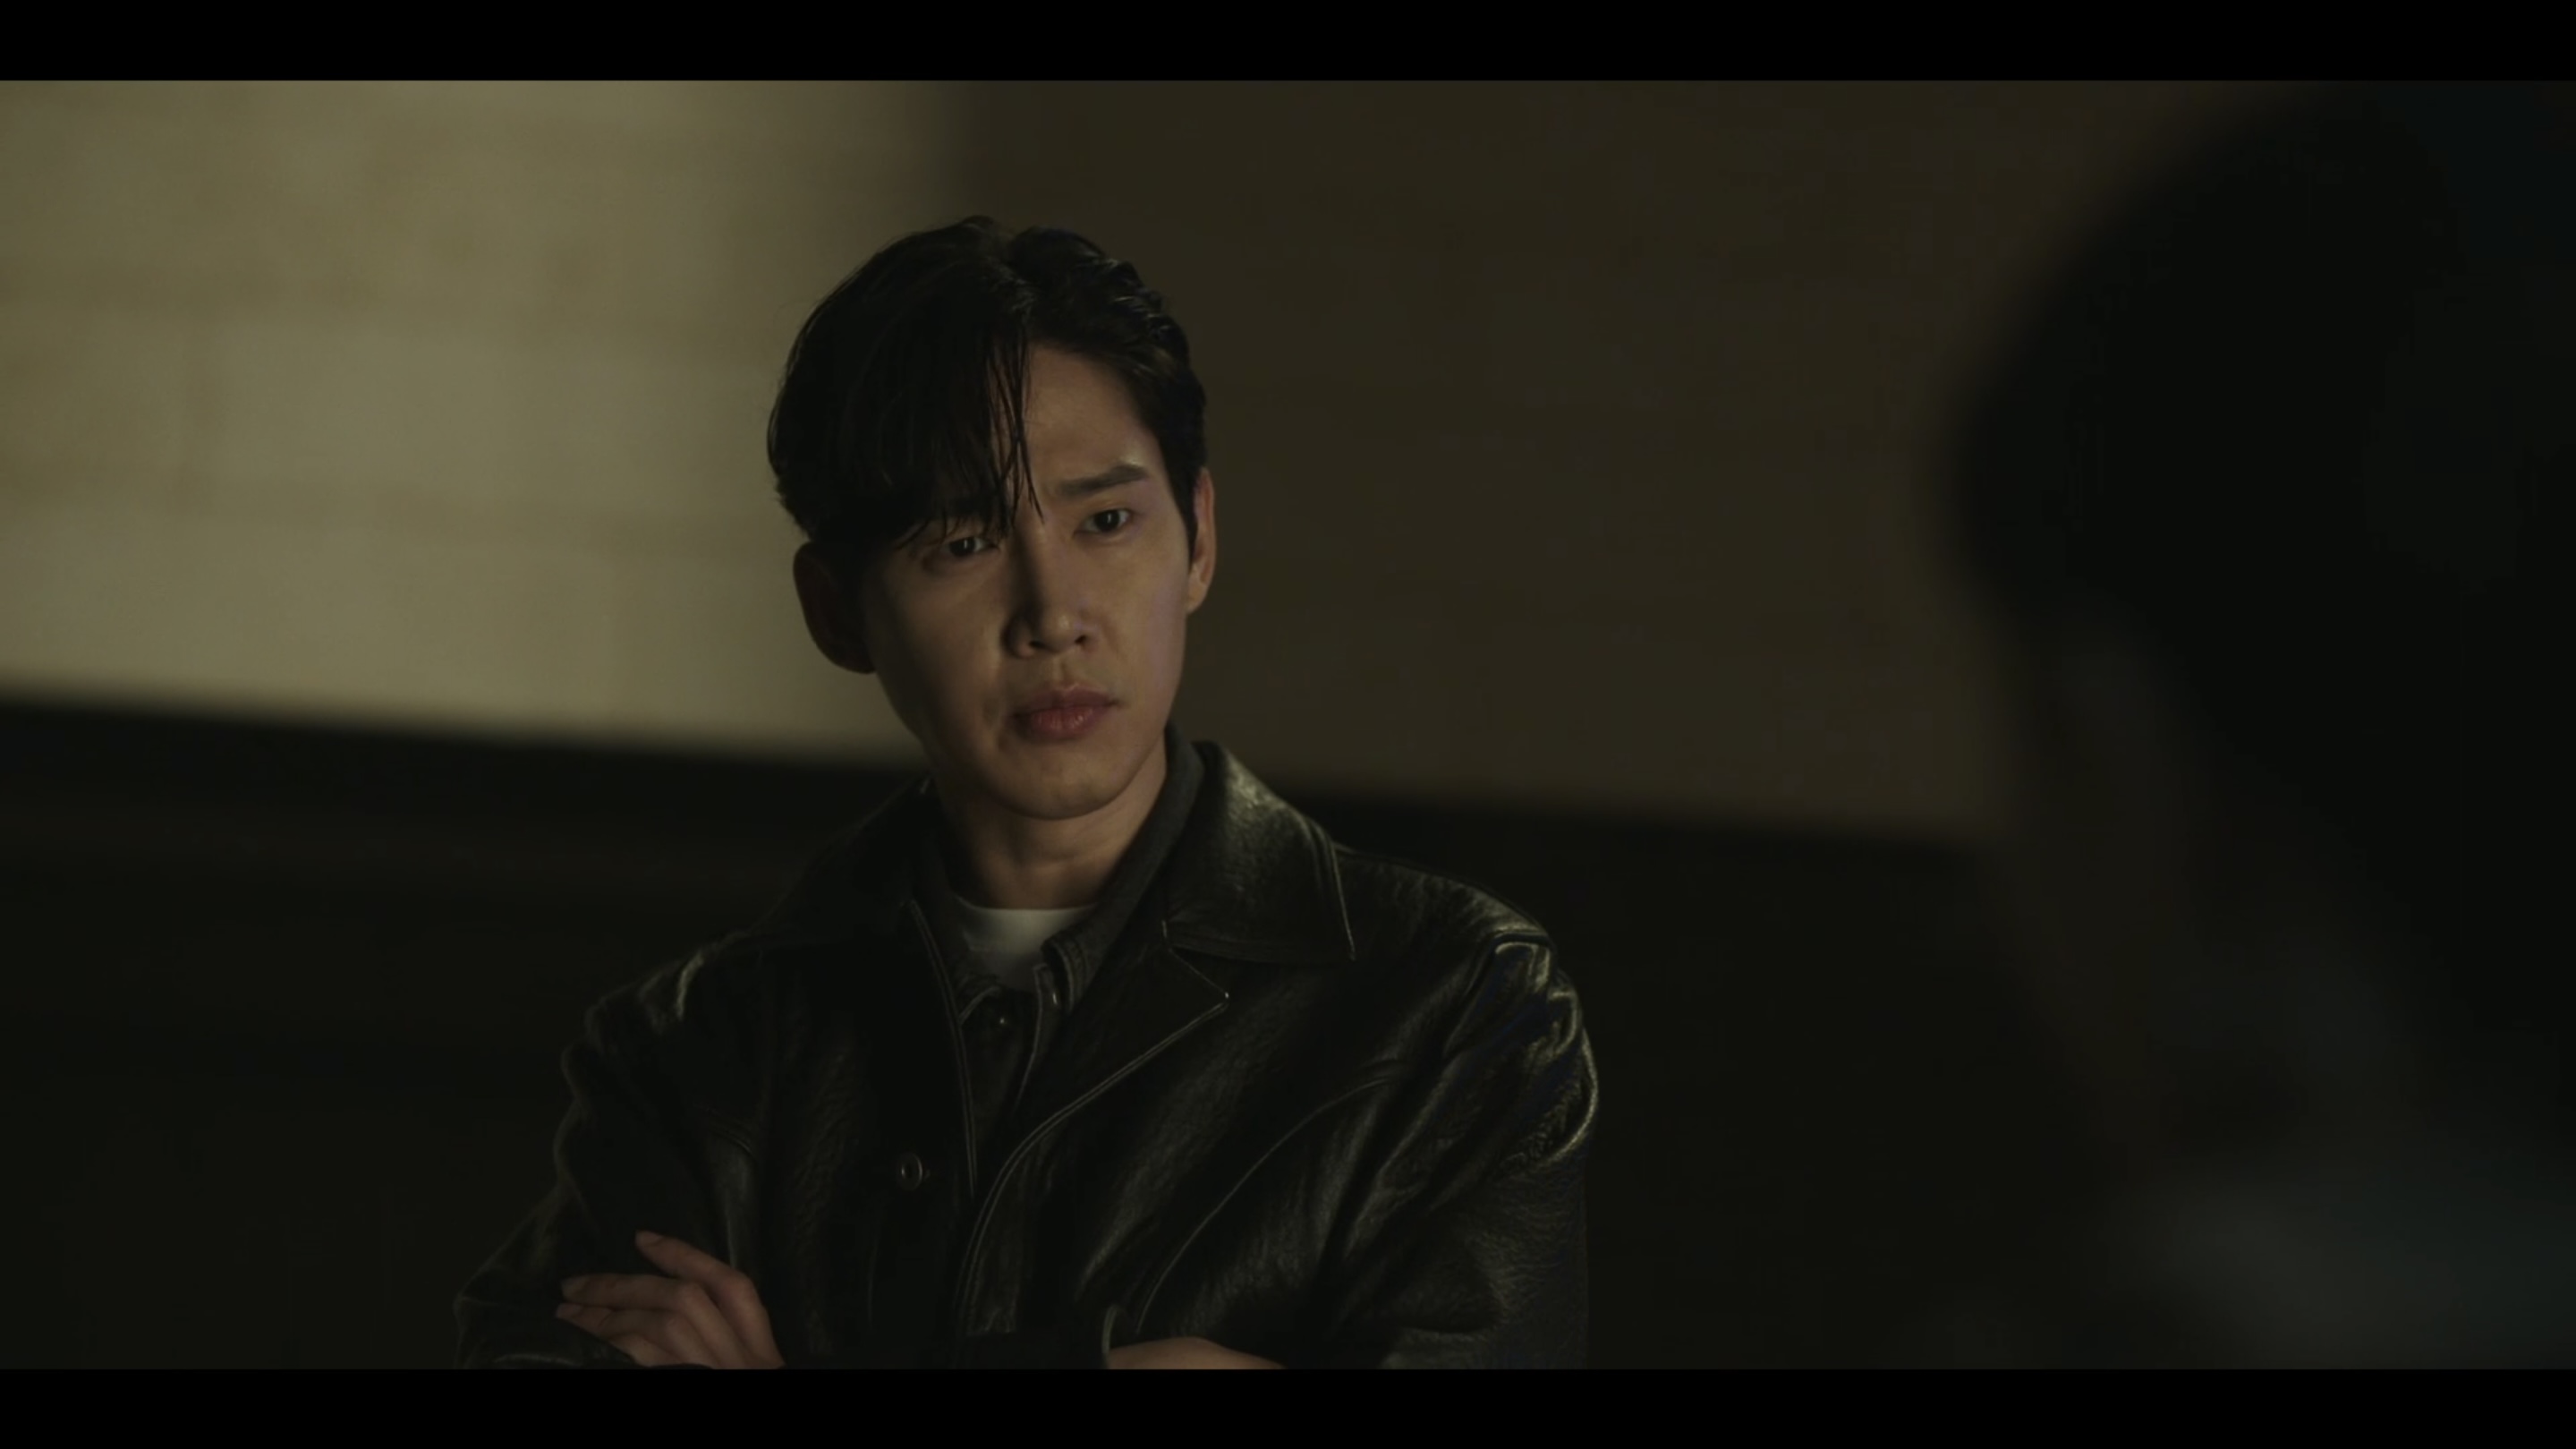 The Kidnapping Day: Episodes 1-2 Park Sung-hoon